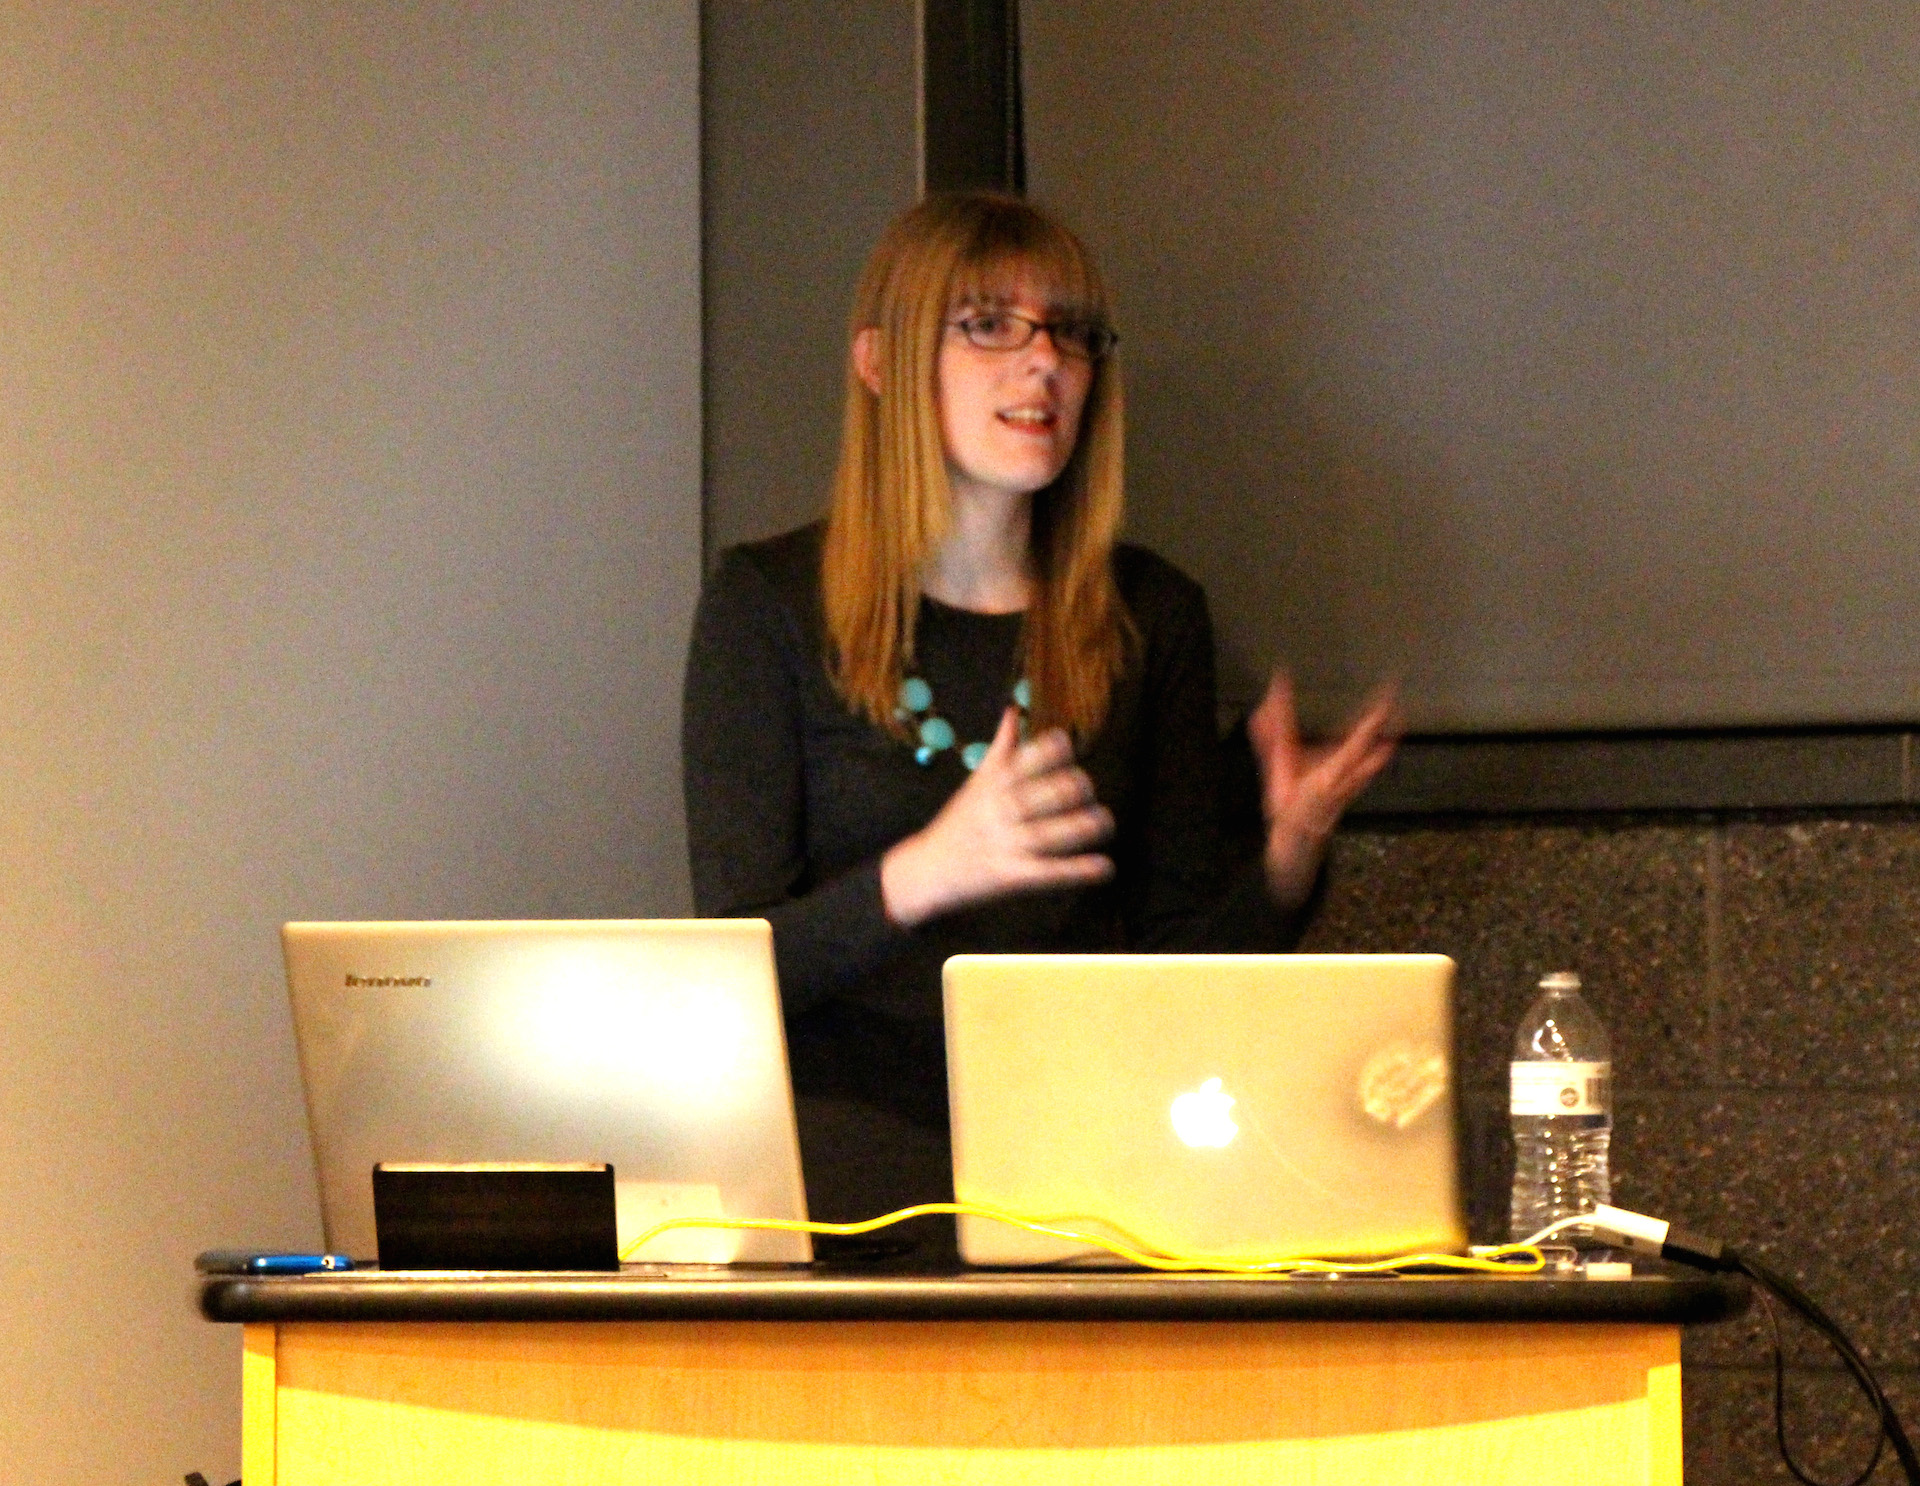 Stephanie Orme delivering her Women in Gaming talk